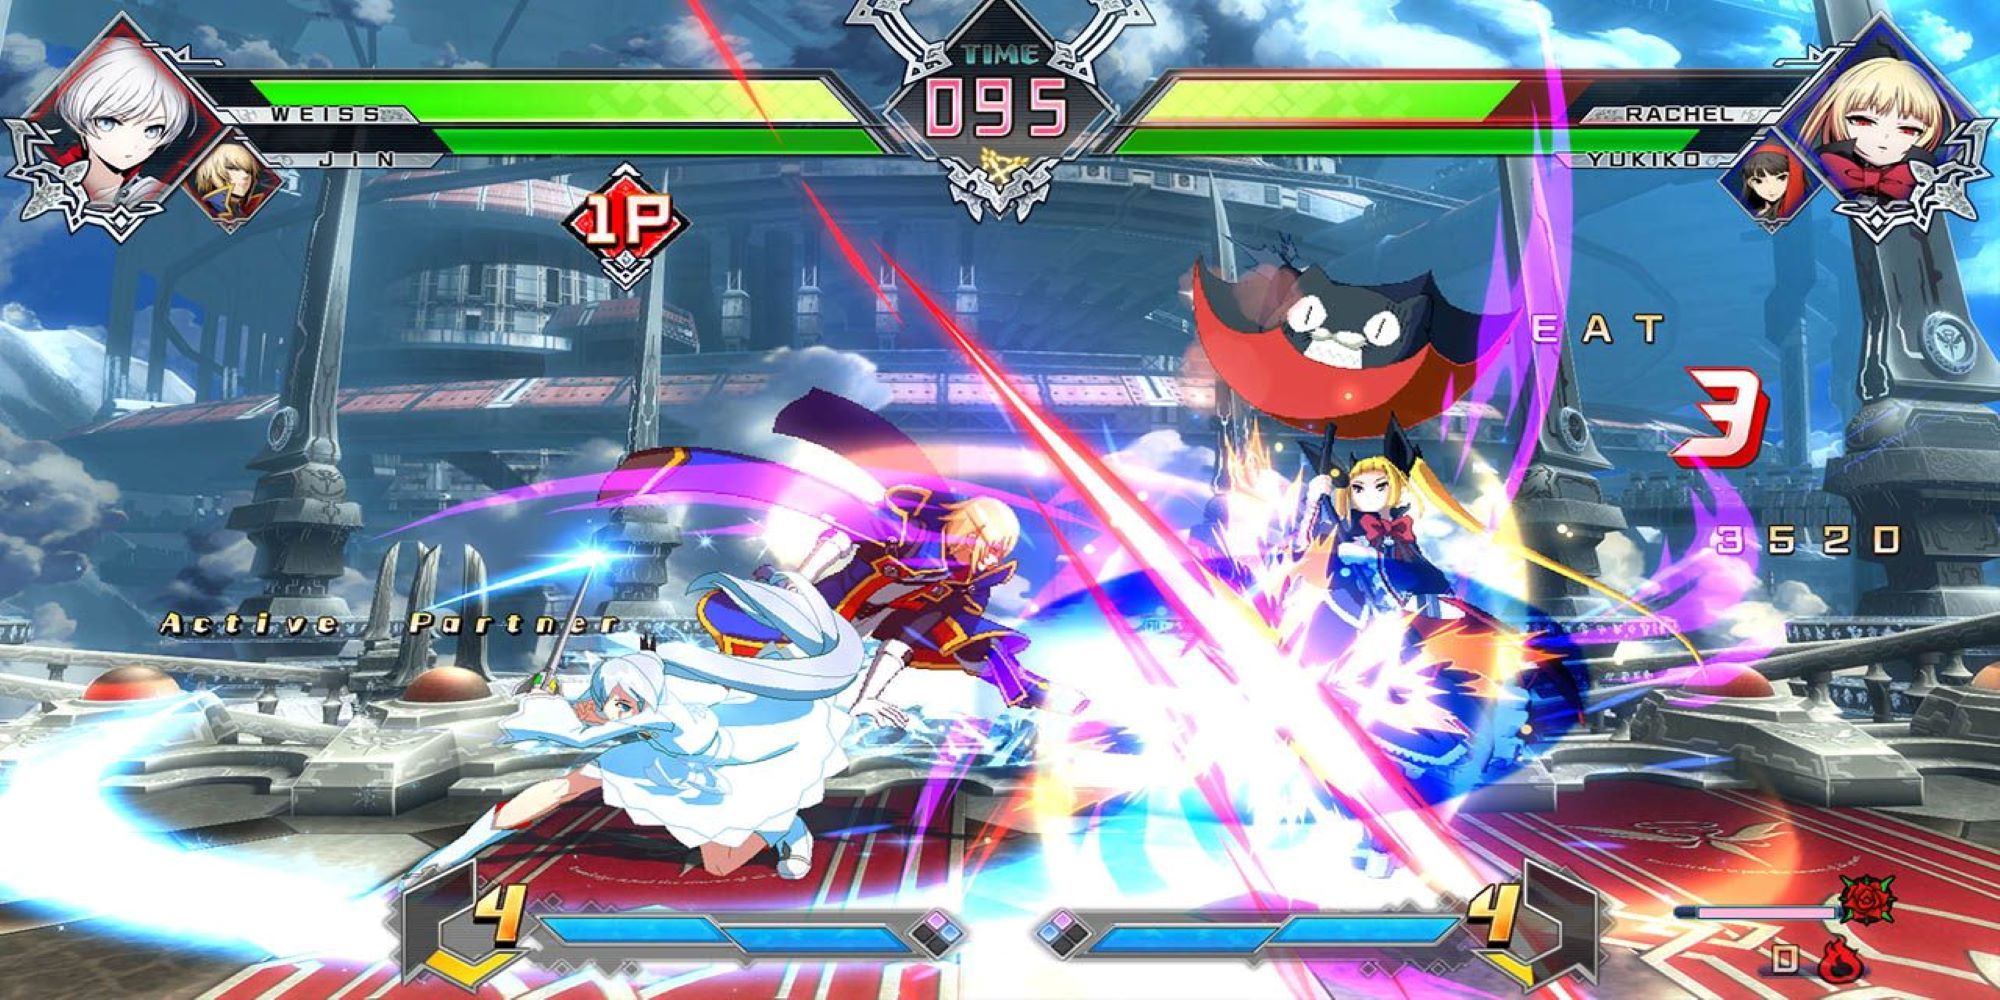 Weiss attacks Rachel with her tag in during a battle in front of a giant mystical building in Blazblue: Cross Tag Battle.